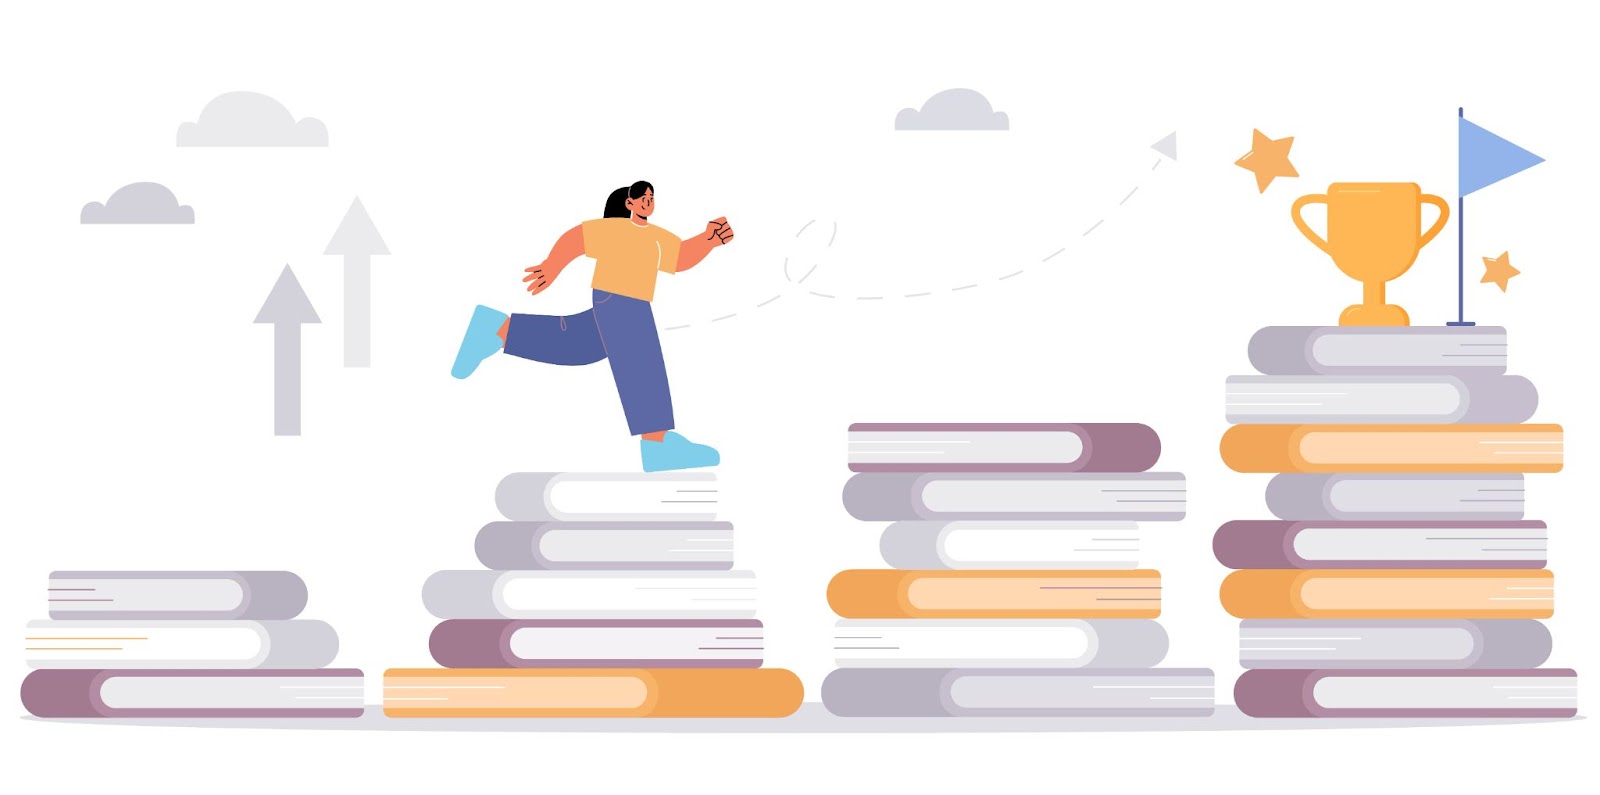 Woman run on stairs of books stacks to award on top concept of reading and knowledge help achieve goals success in education and career